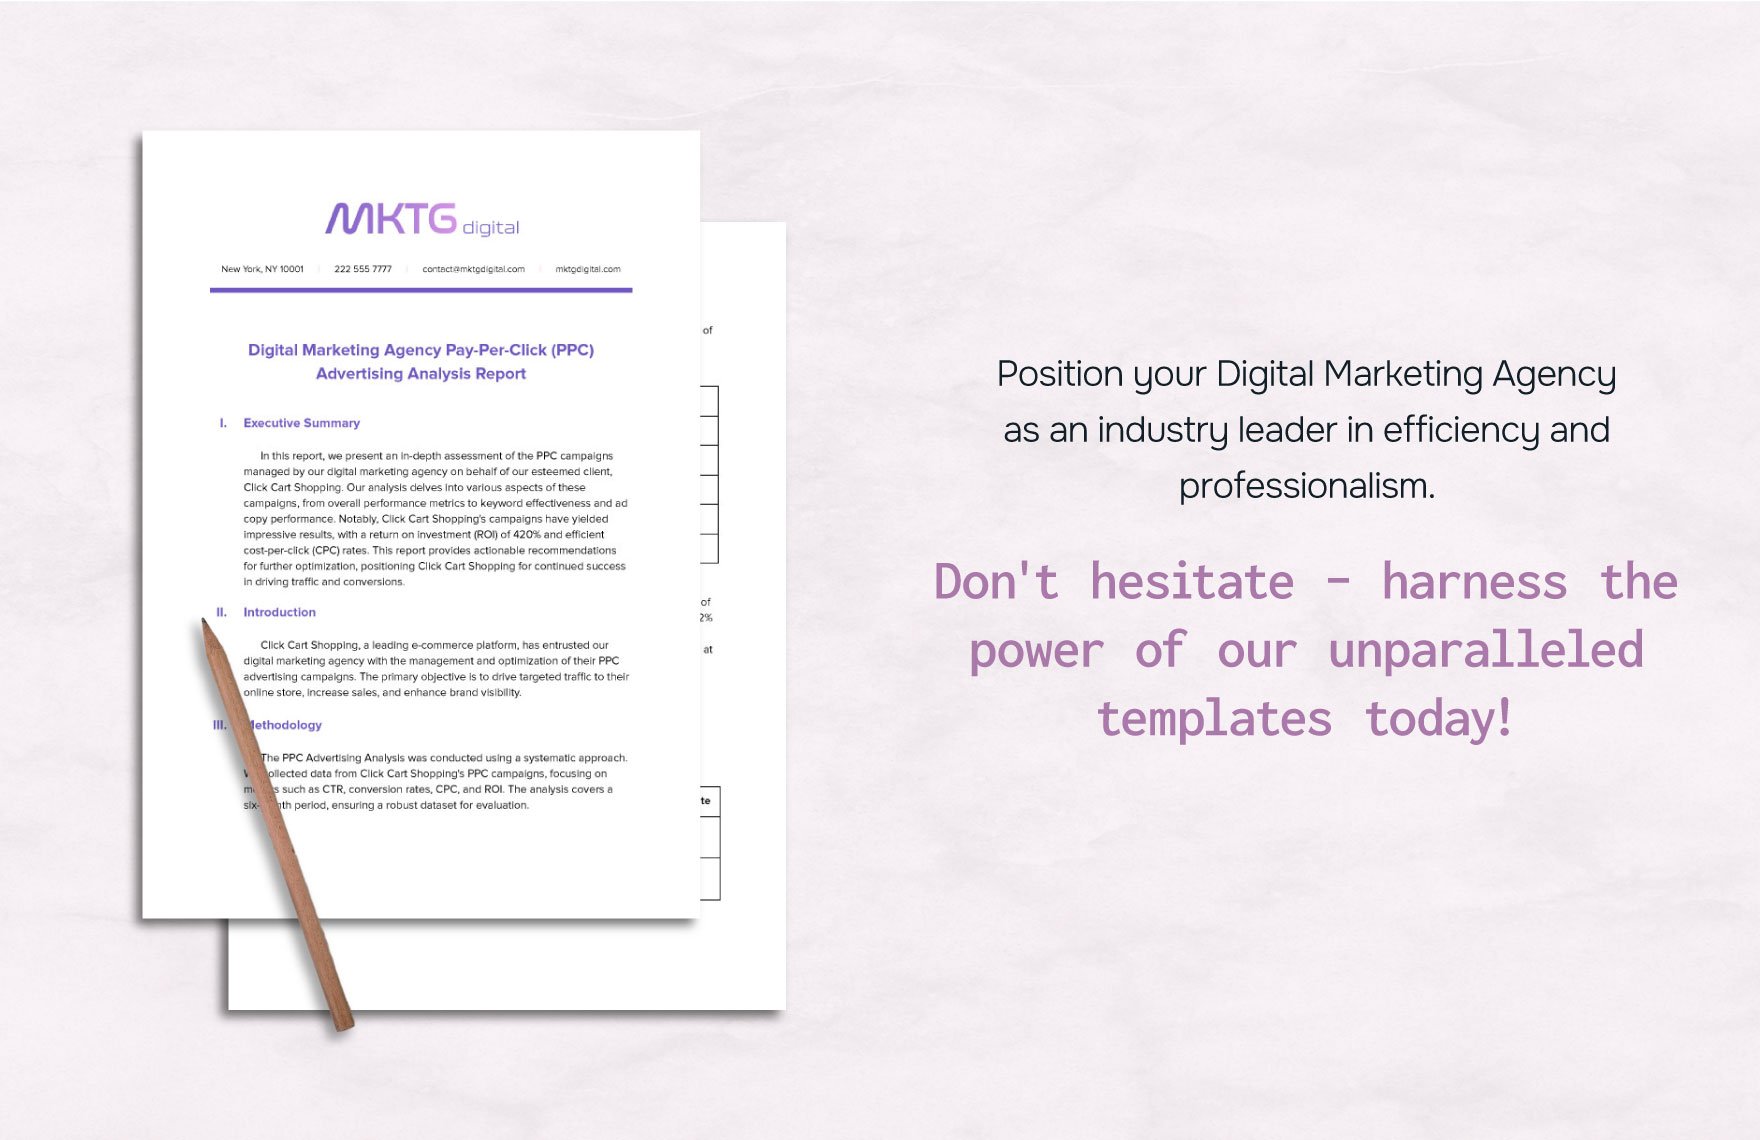 Digital Marketing Agency Pay-Per-Click (PPC) Advertising Analysis Report Template